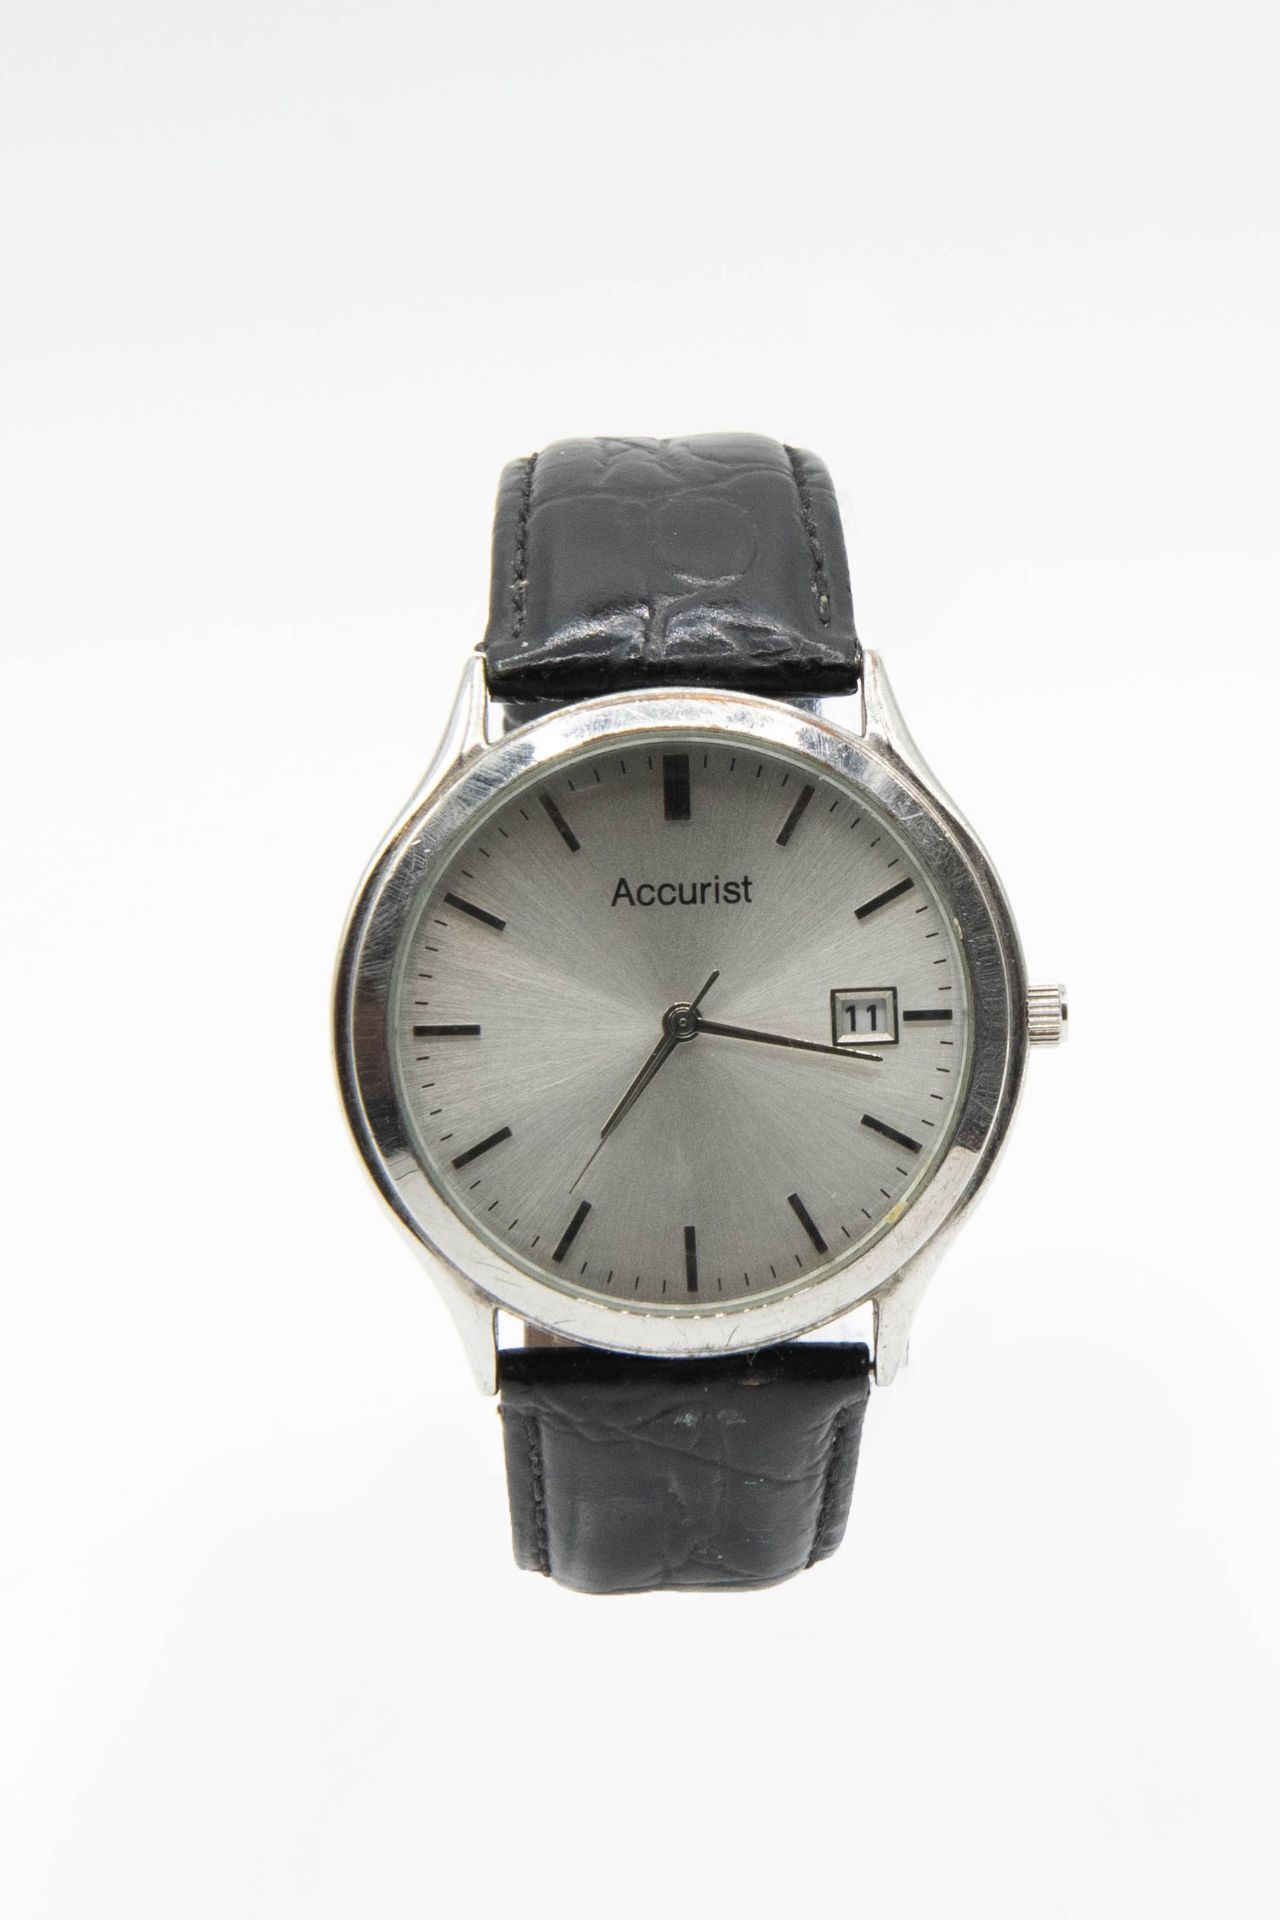 AN ACCURIST STAINLESS STEEL WRIST WATCH